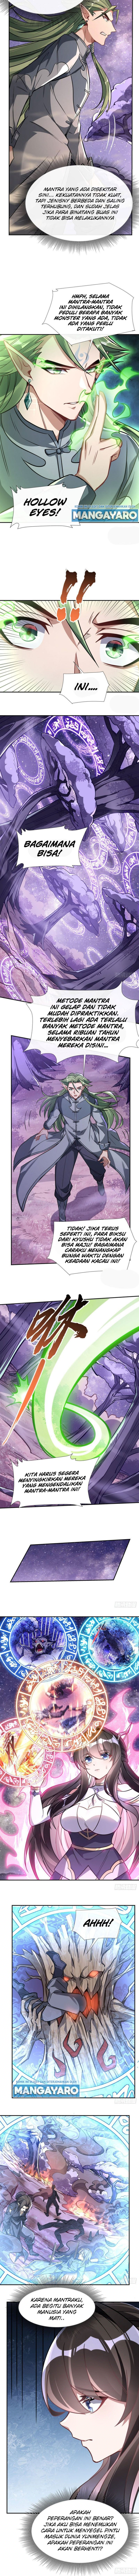 Dilarang COPAS - situs resmi www.mangacanblog.com - Komik my female apprentices are all big shots from the future 109 - chapter 109 110 Indonesia my female apprentices are all big shots from the future 109 - chapter 109 Terbaru 2|Baca Manga Komik Indonesia|Mangacan